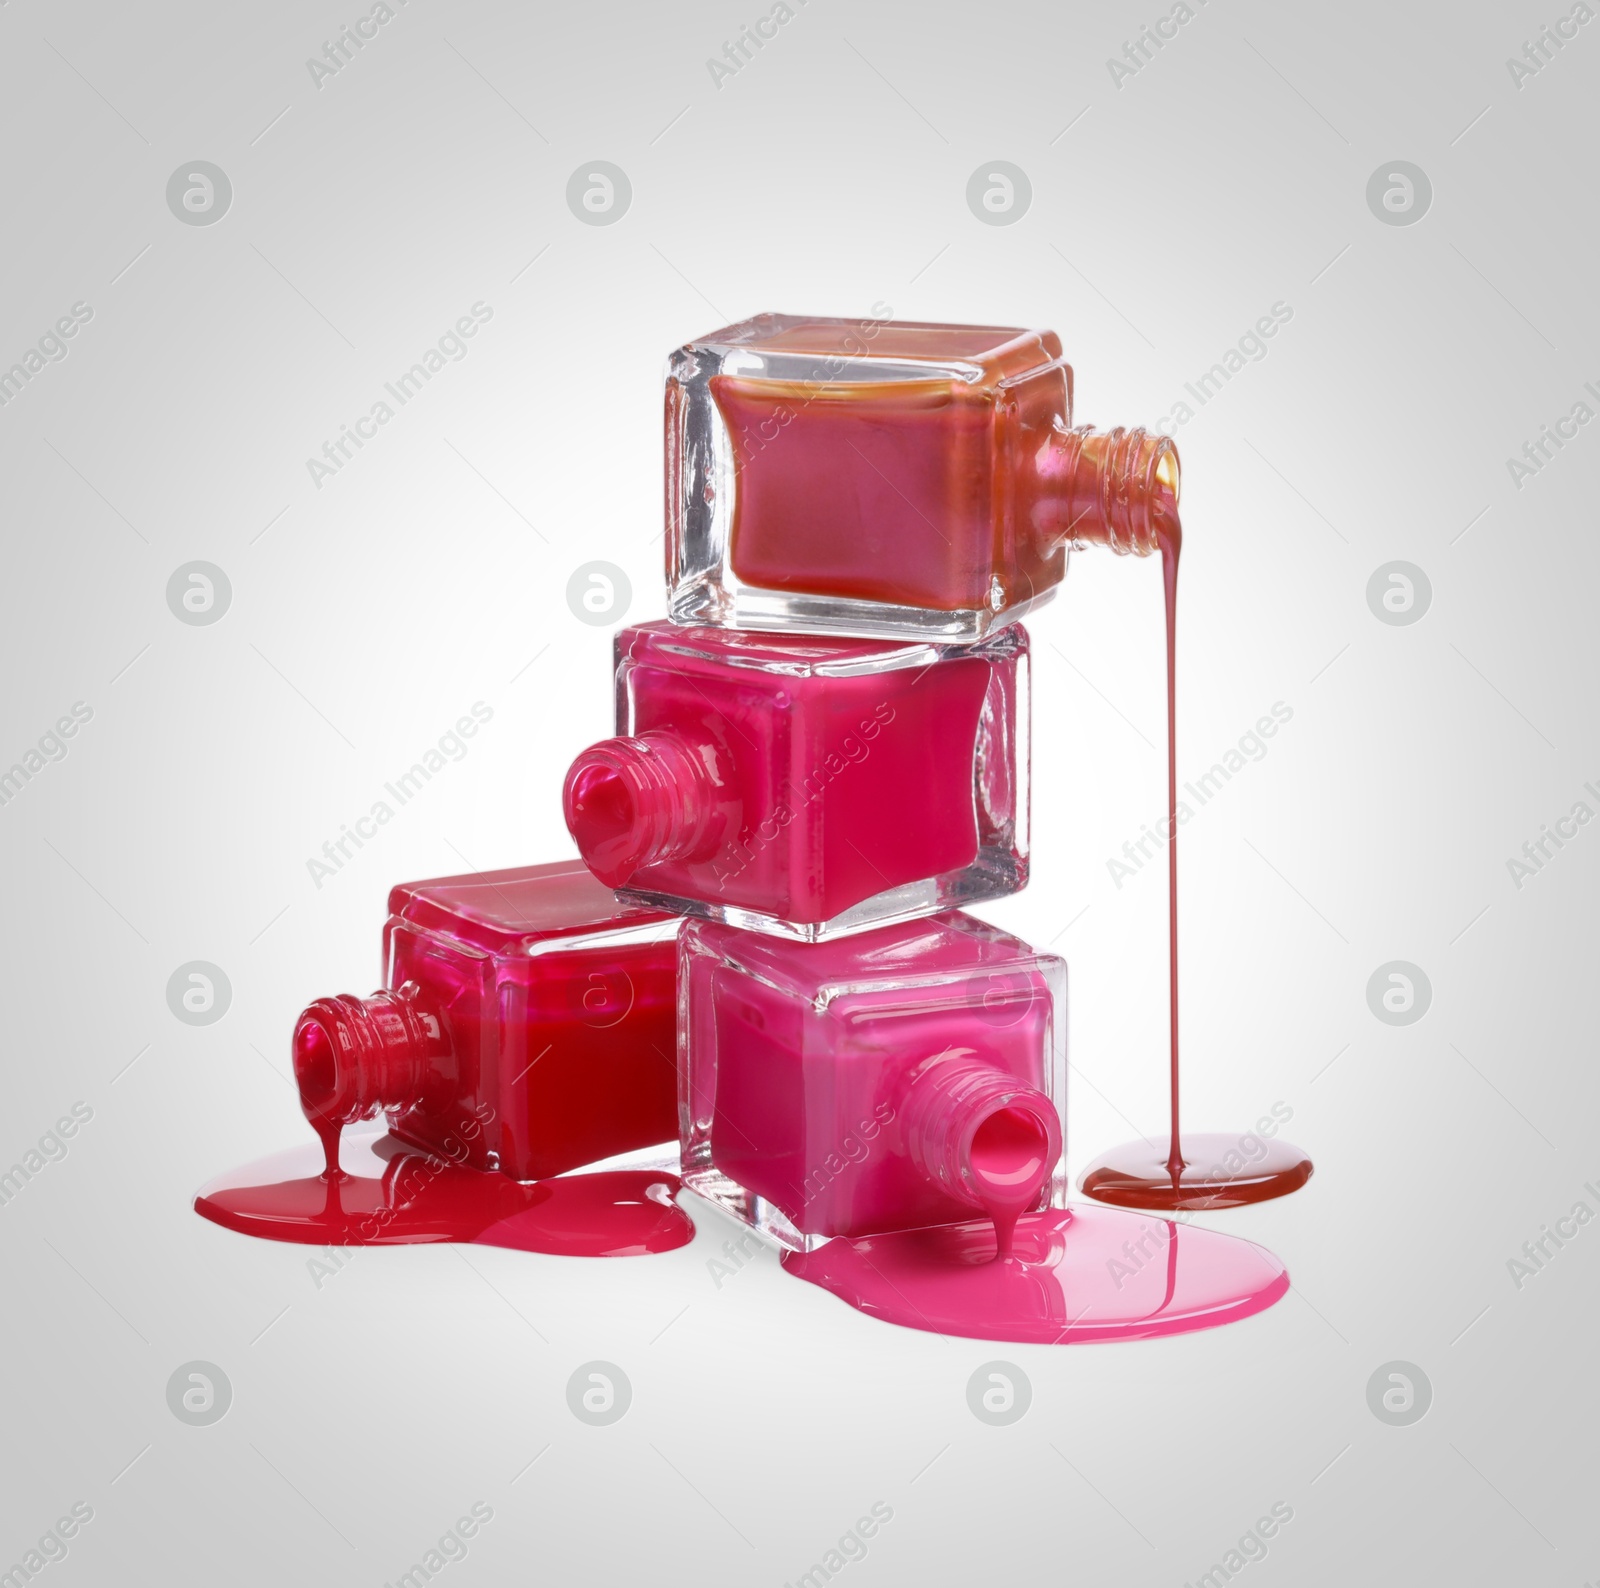 Image of Different nail polishes dripping from open bottles on light background